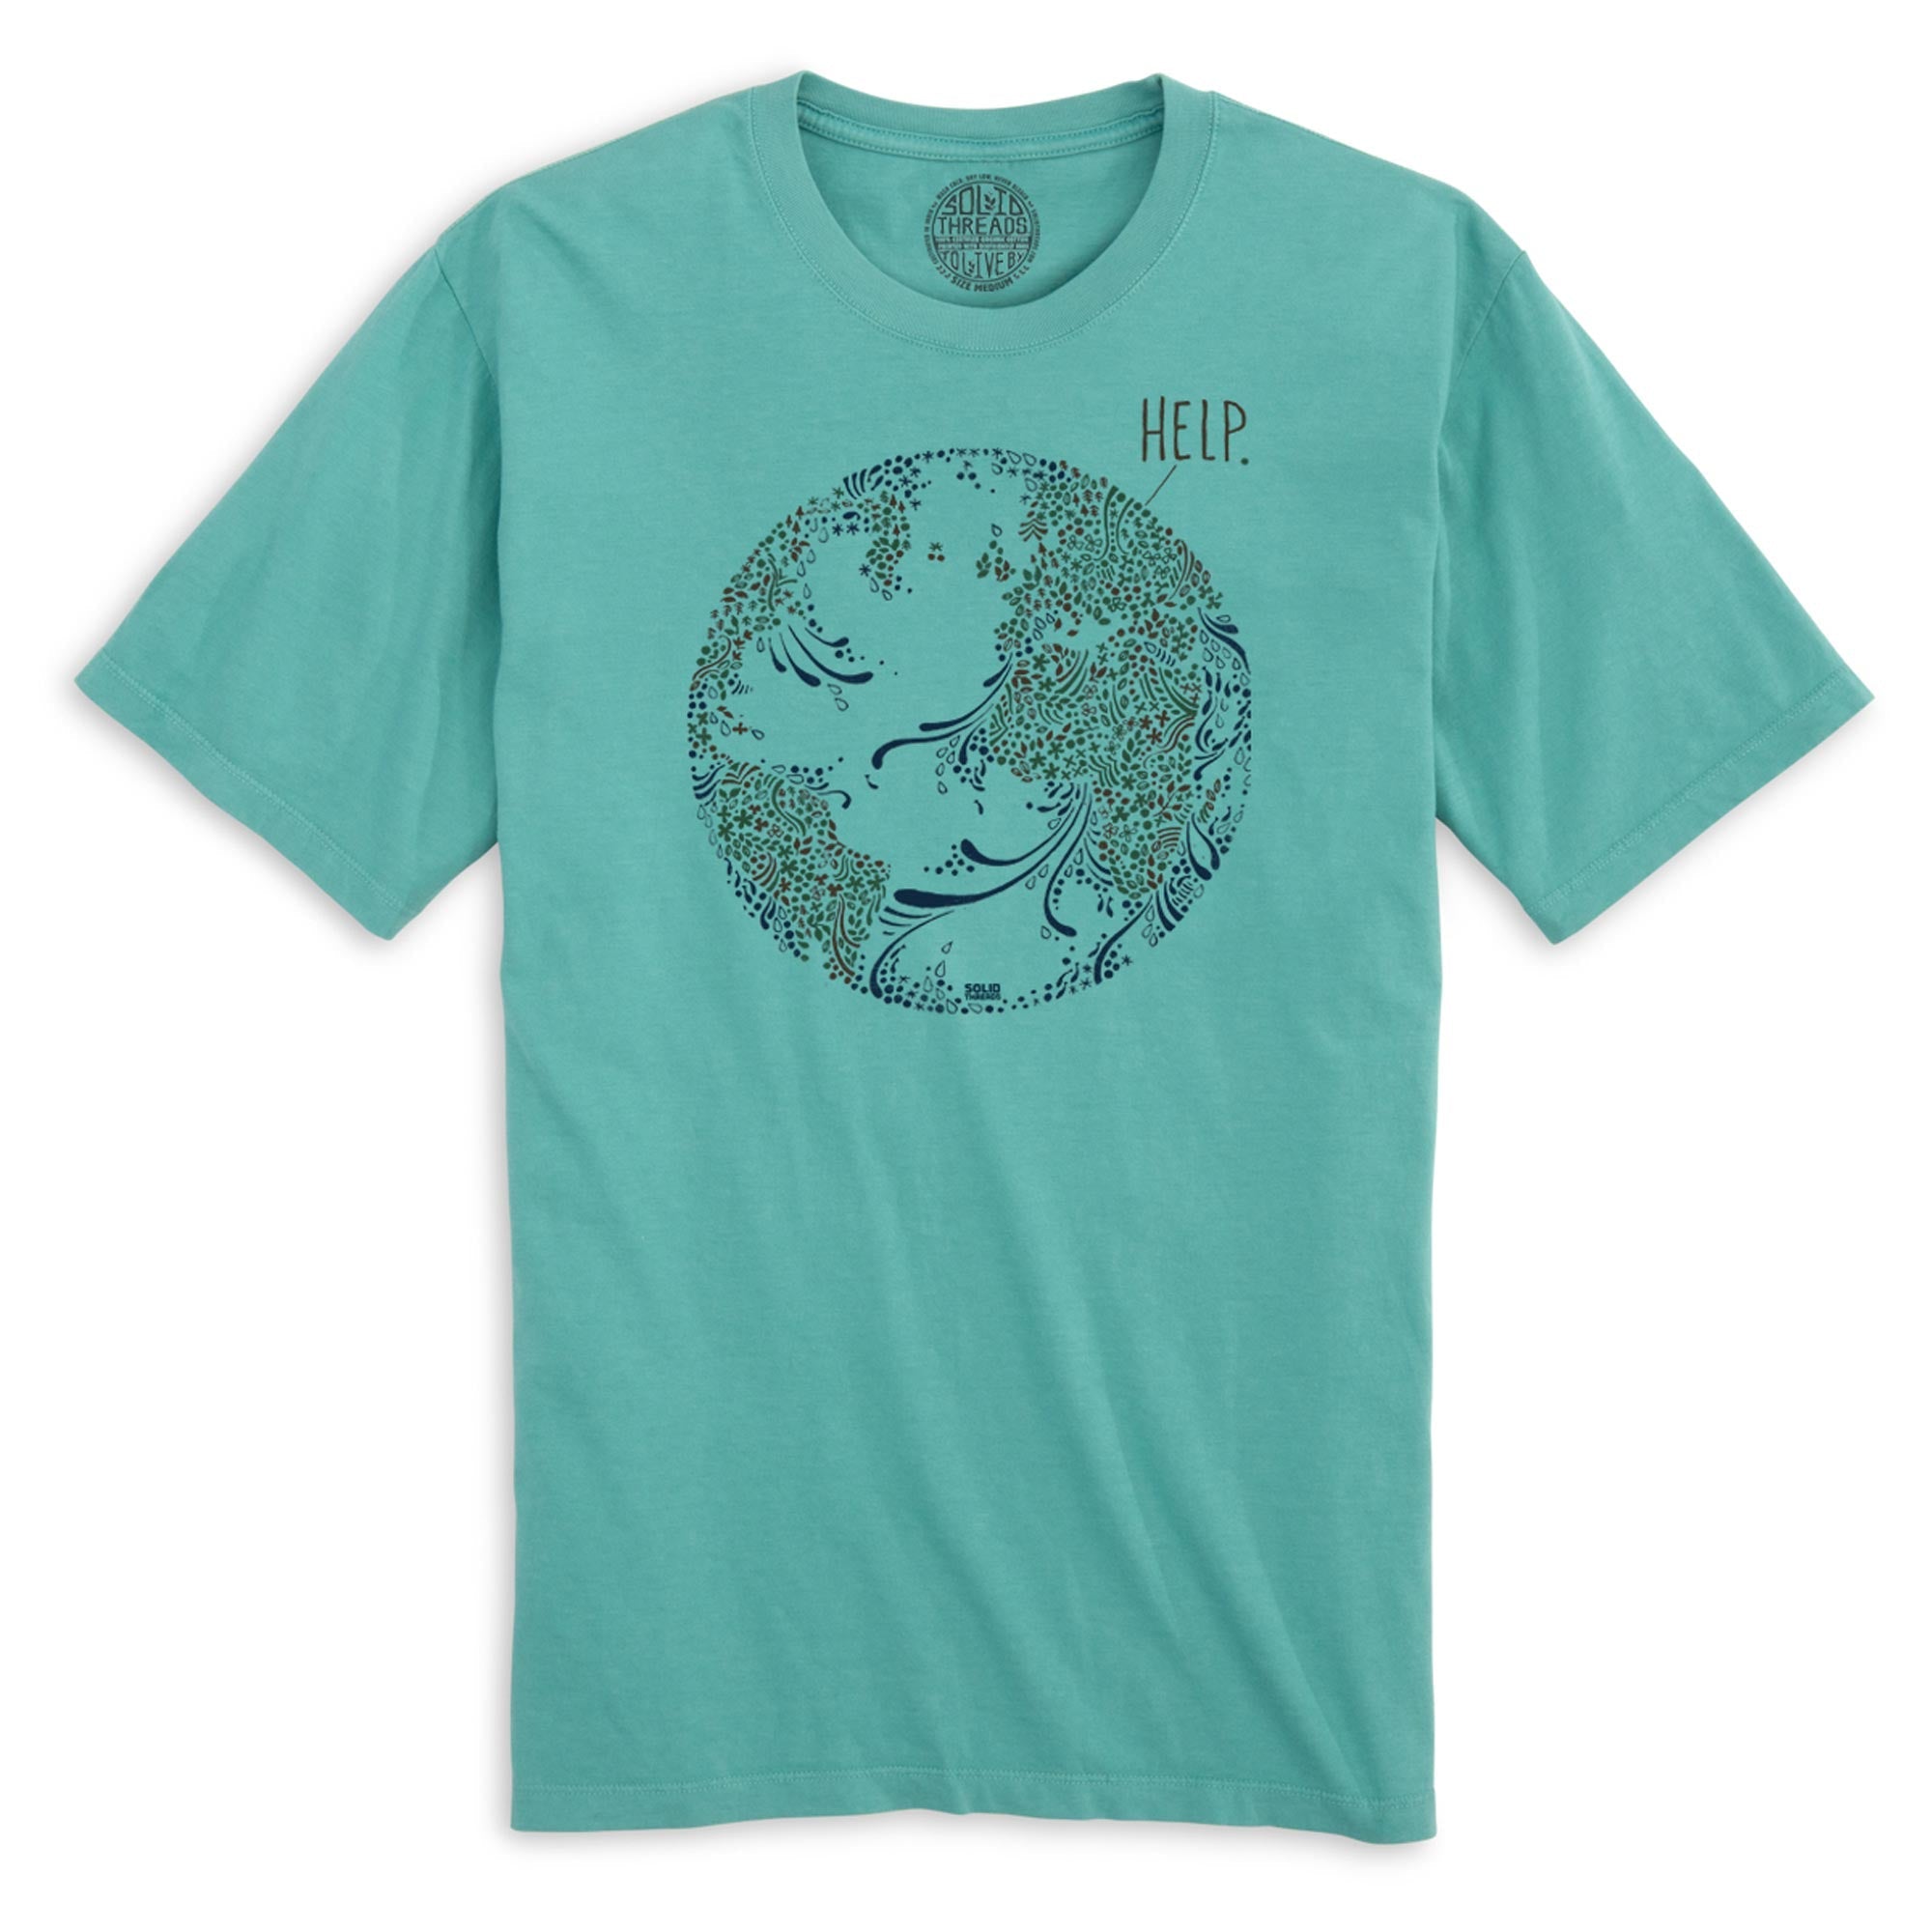 Earth Help Cool Organic Cotton T-shirt | Vintage Environmentalism Advocate  Tee | Solid Threads